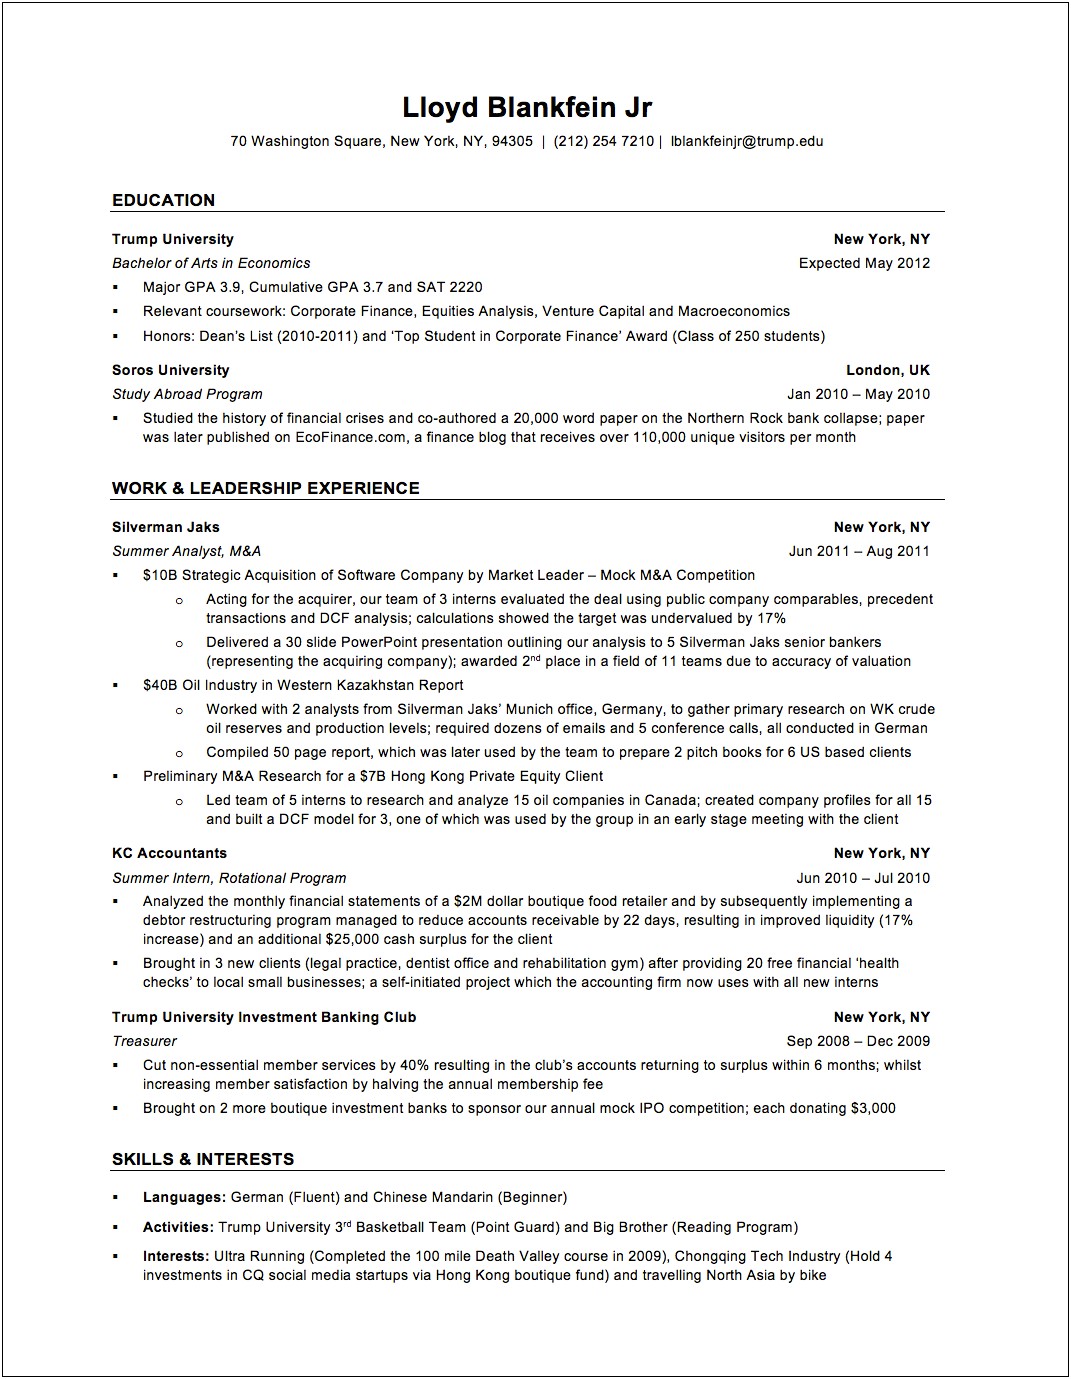 Private Equity Investment Banking Resume Template